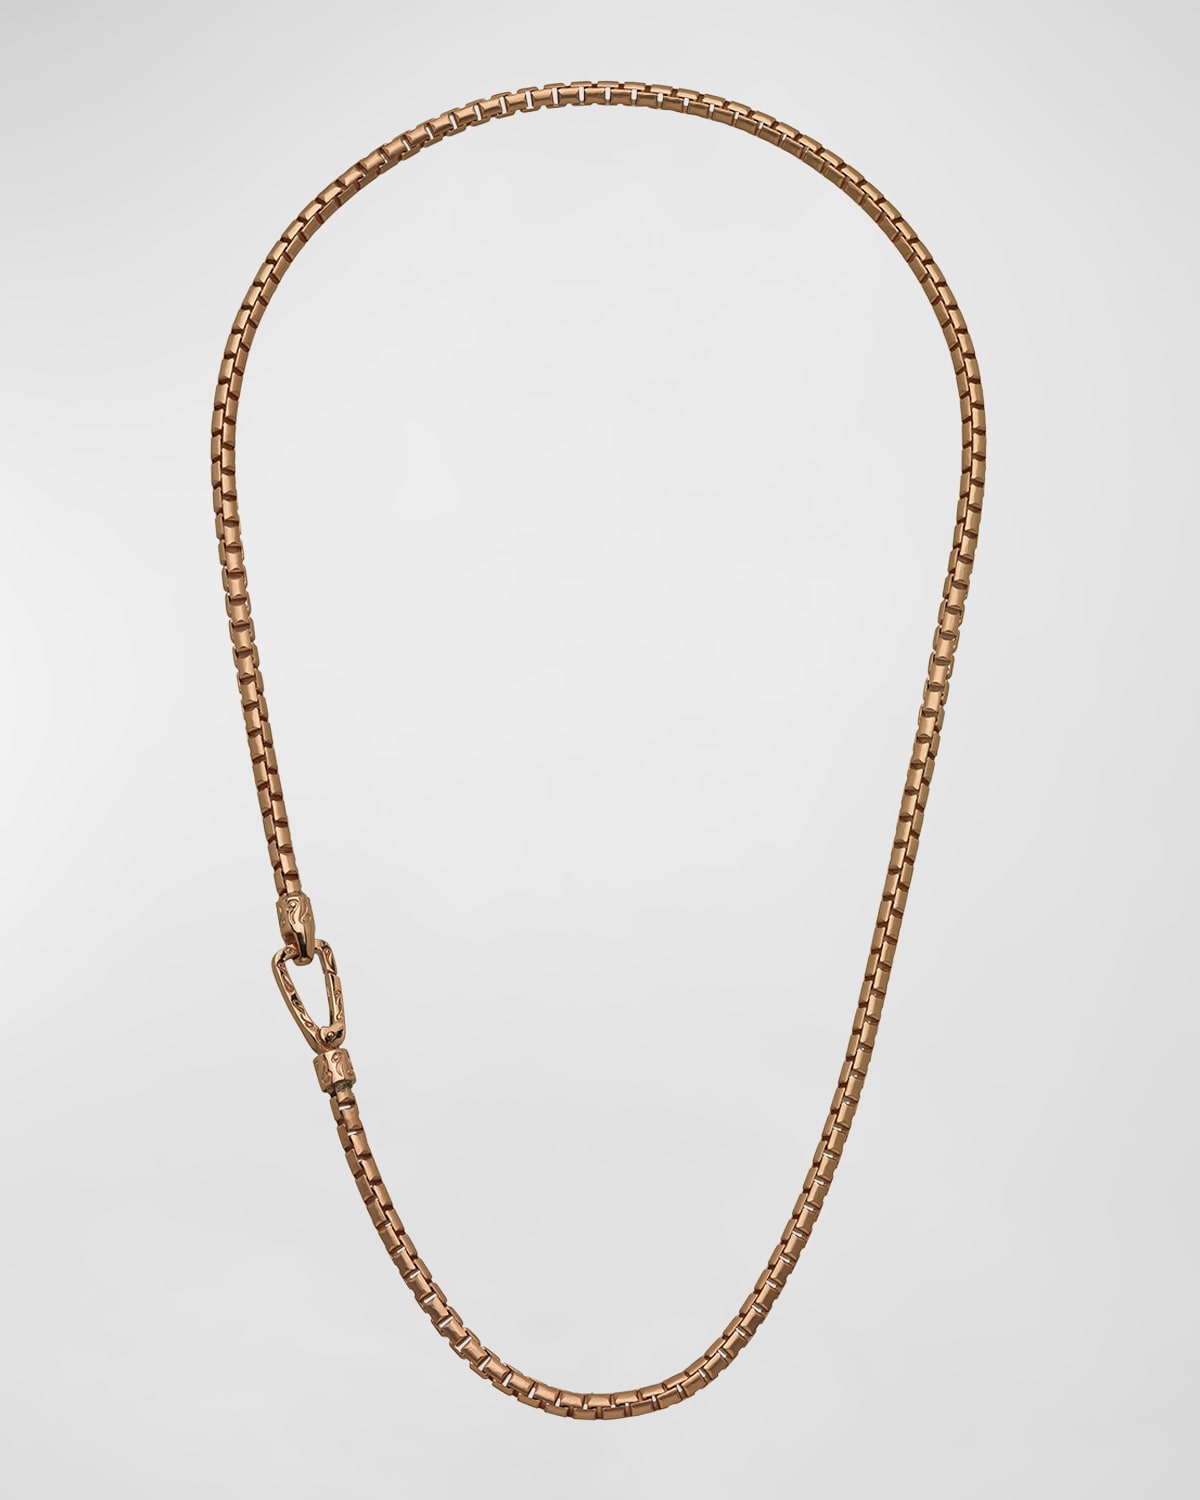 Marco Dal Maso Carved Tubular Rose Gold Plated Silver Necklace With Matte Chain And Polished Clasp, 24"l